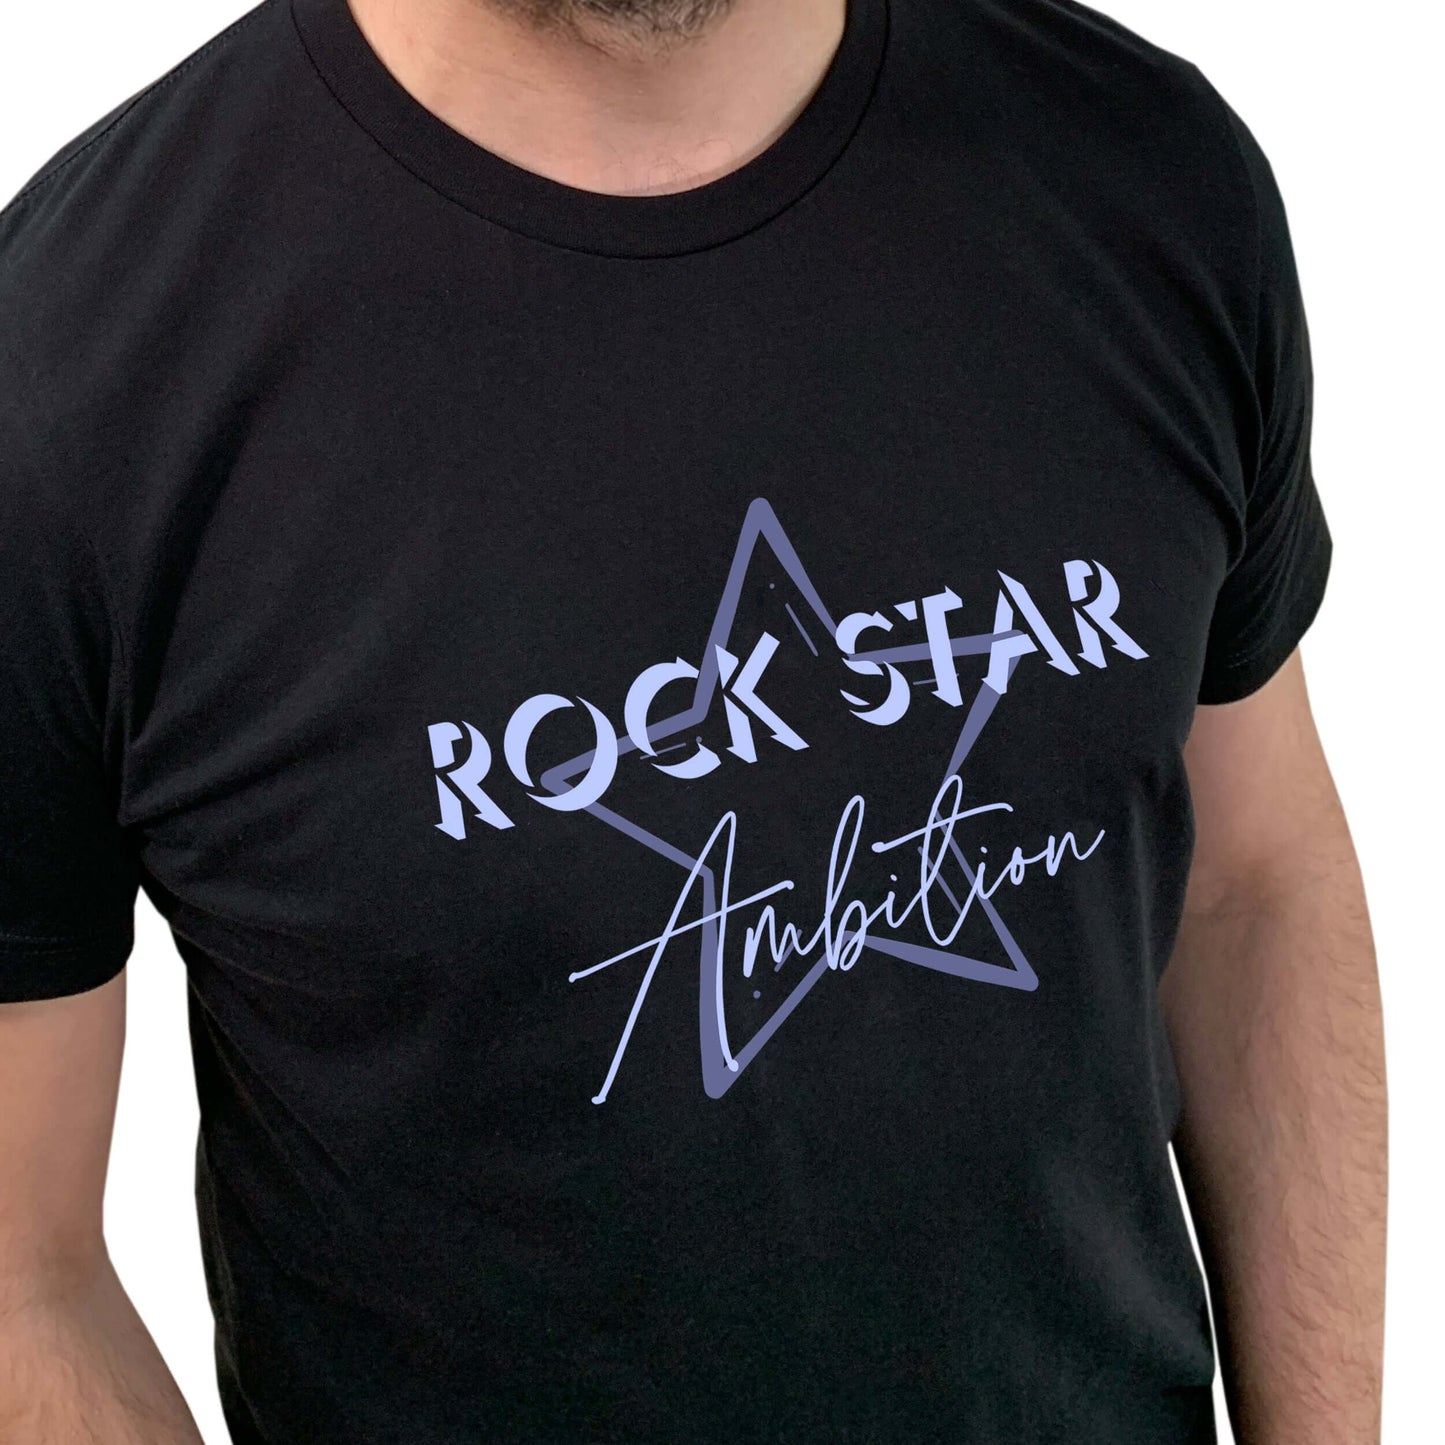 Man wearing mens black short sleeve graphic tshirt. Crew neck casual wear. Band Tee Design is mid purple star outline behind wording ROCK STAR in upper case shadowed  light grey/purple text, then Ambition below in script. Rock music themed unisex top